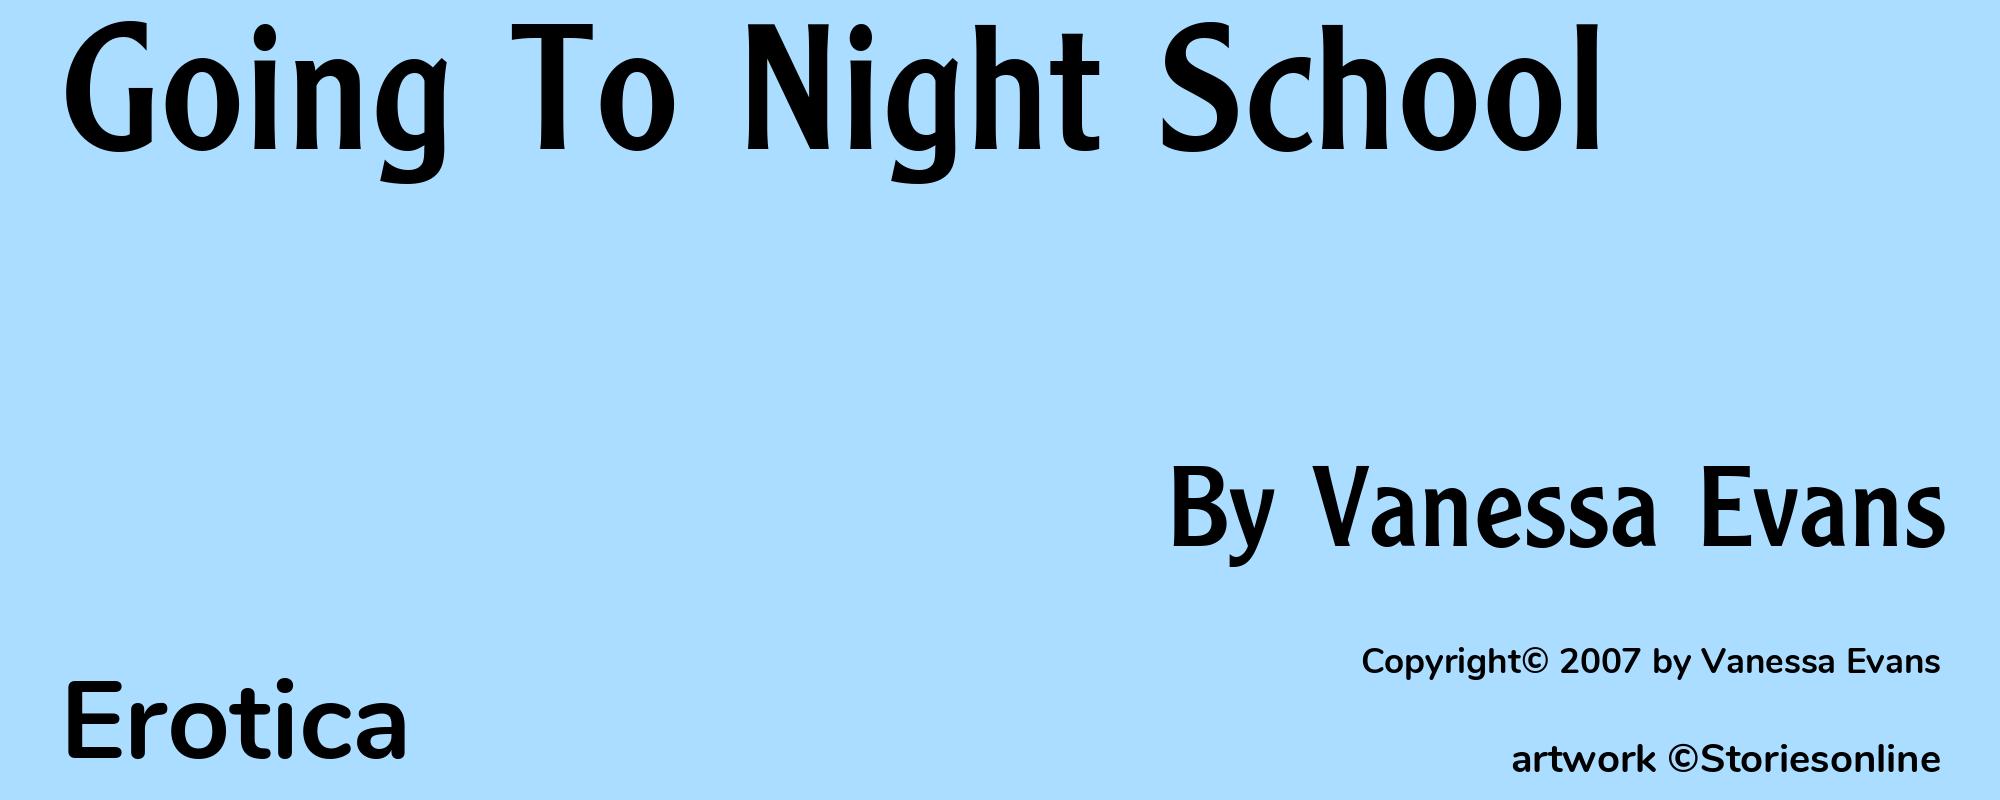 Going To Night School - Cover